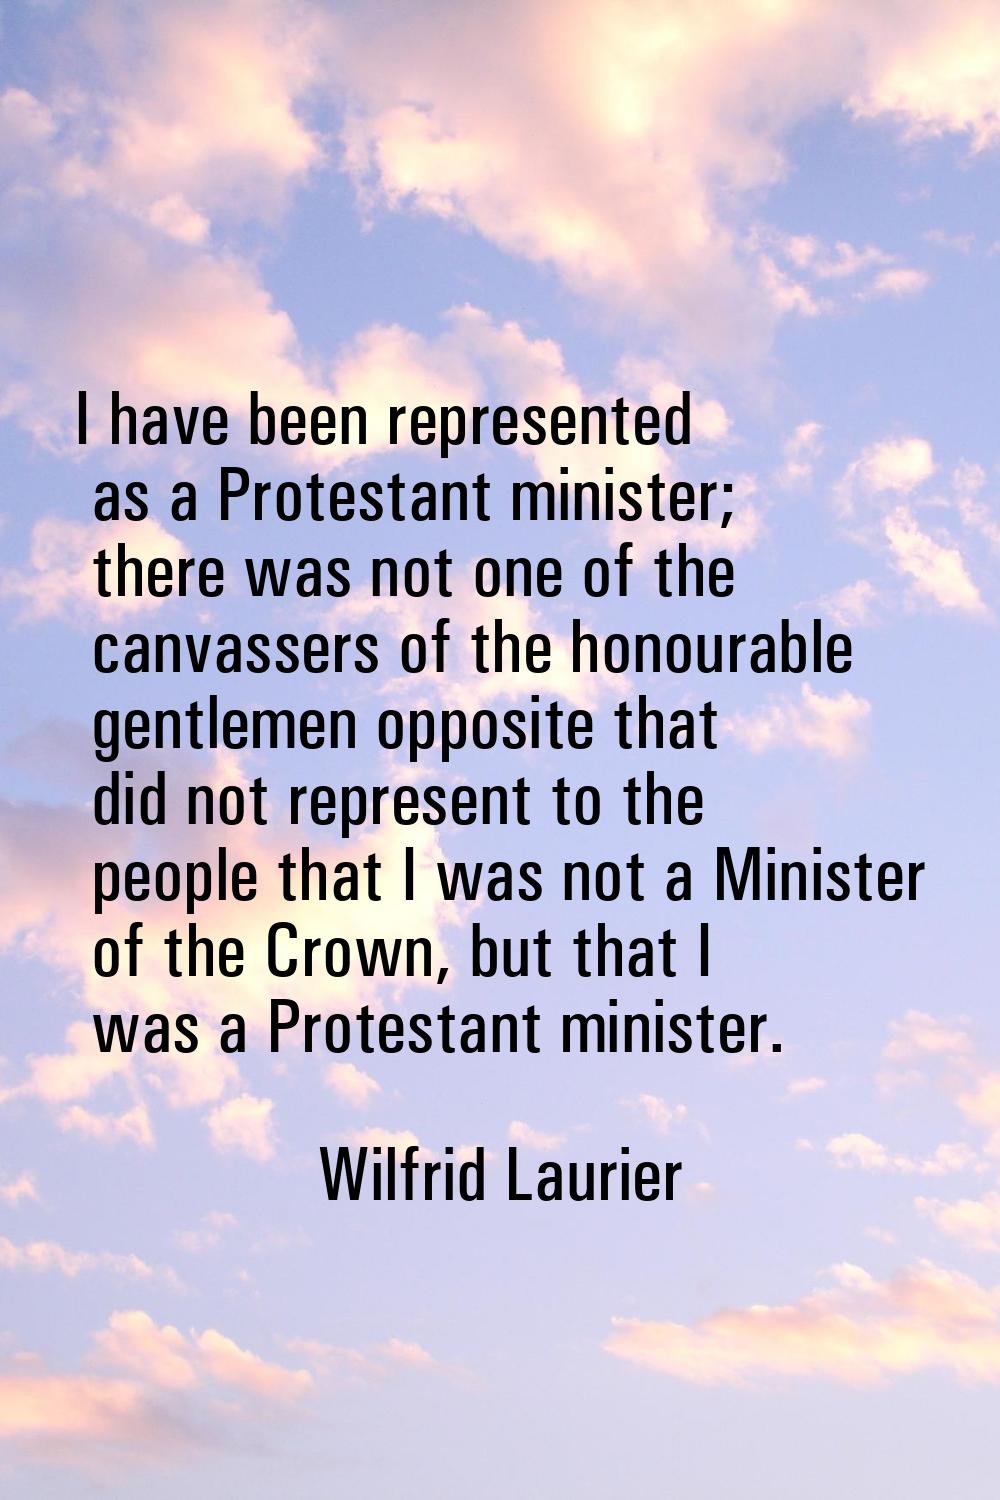 I have been represented as a Protestant minister; there was not one of the canvassers of the honour